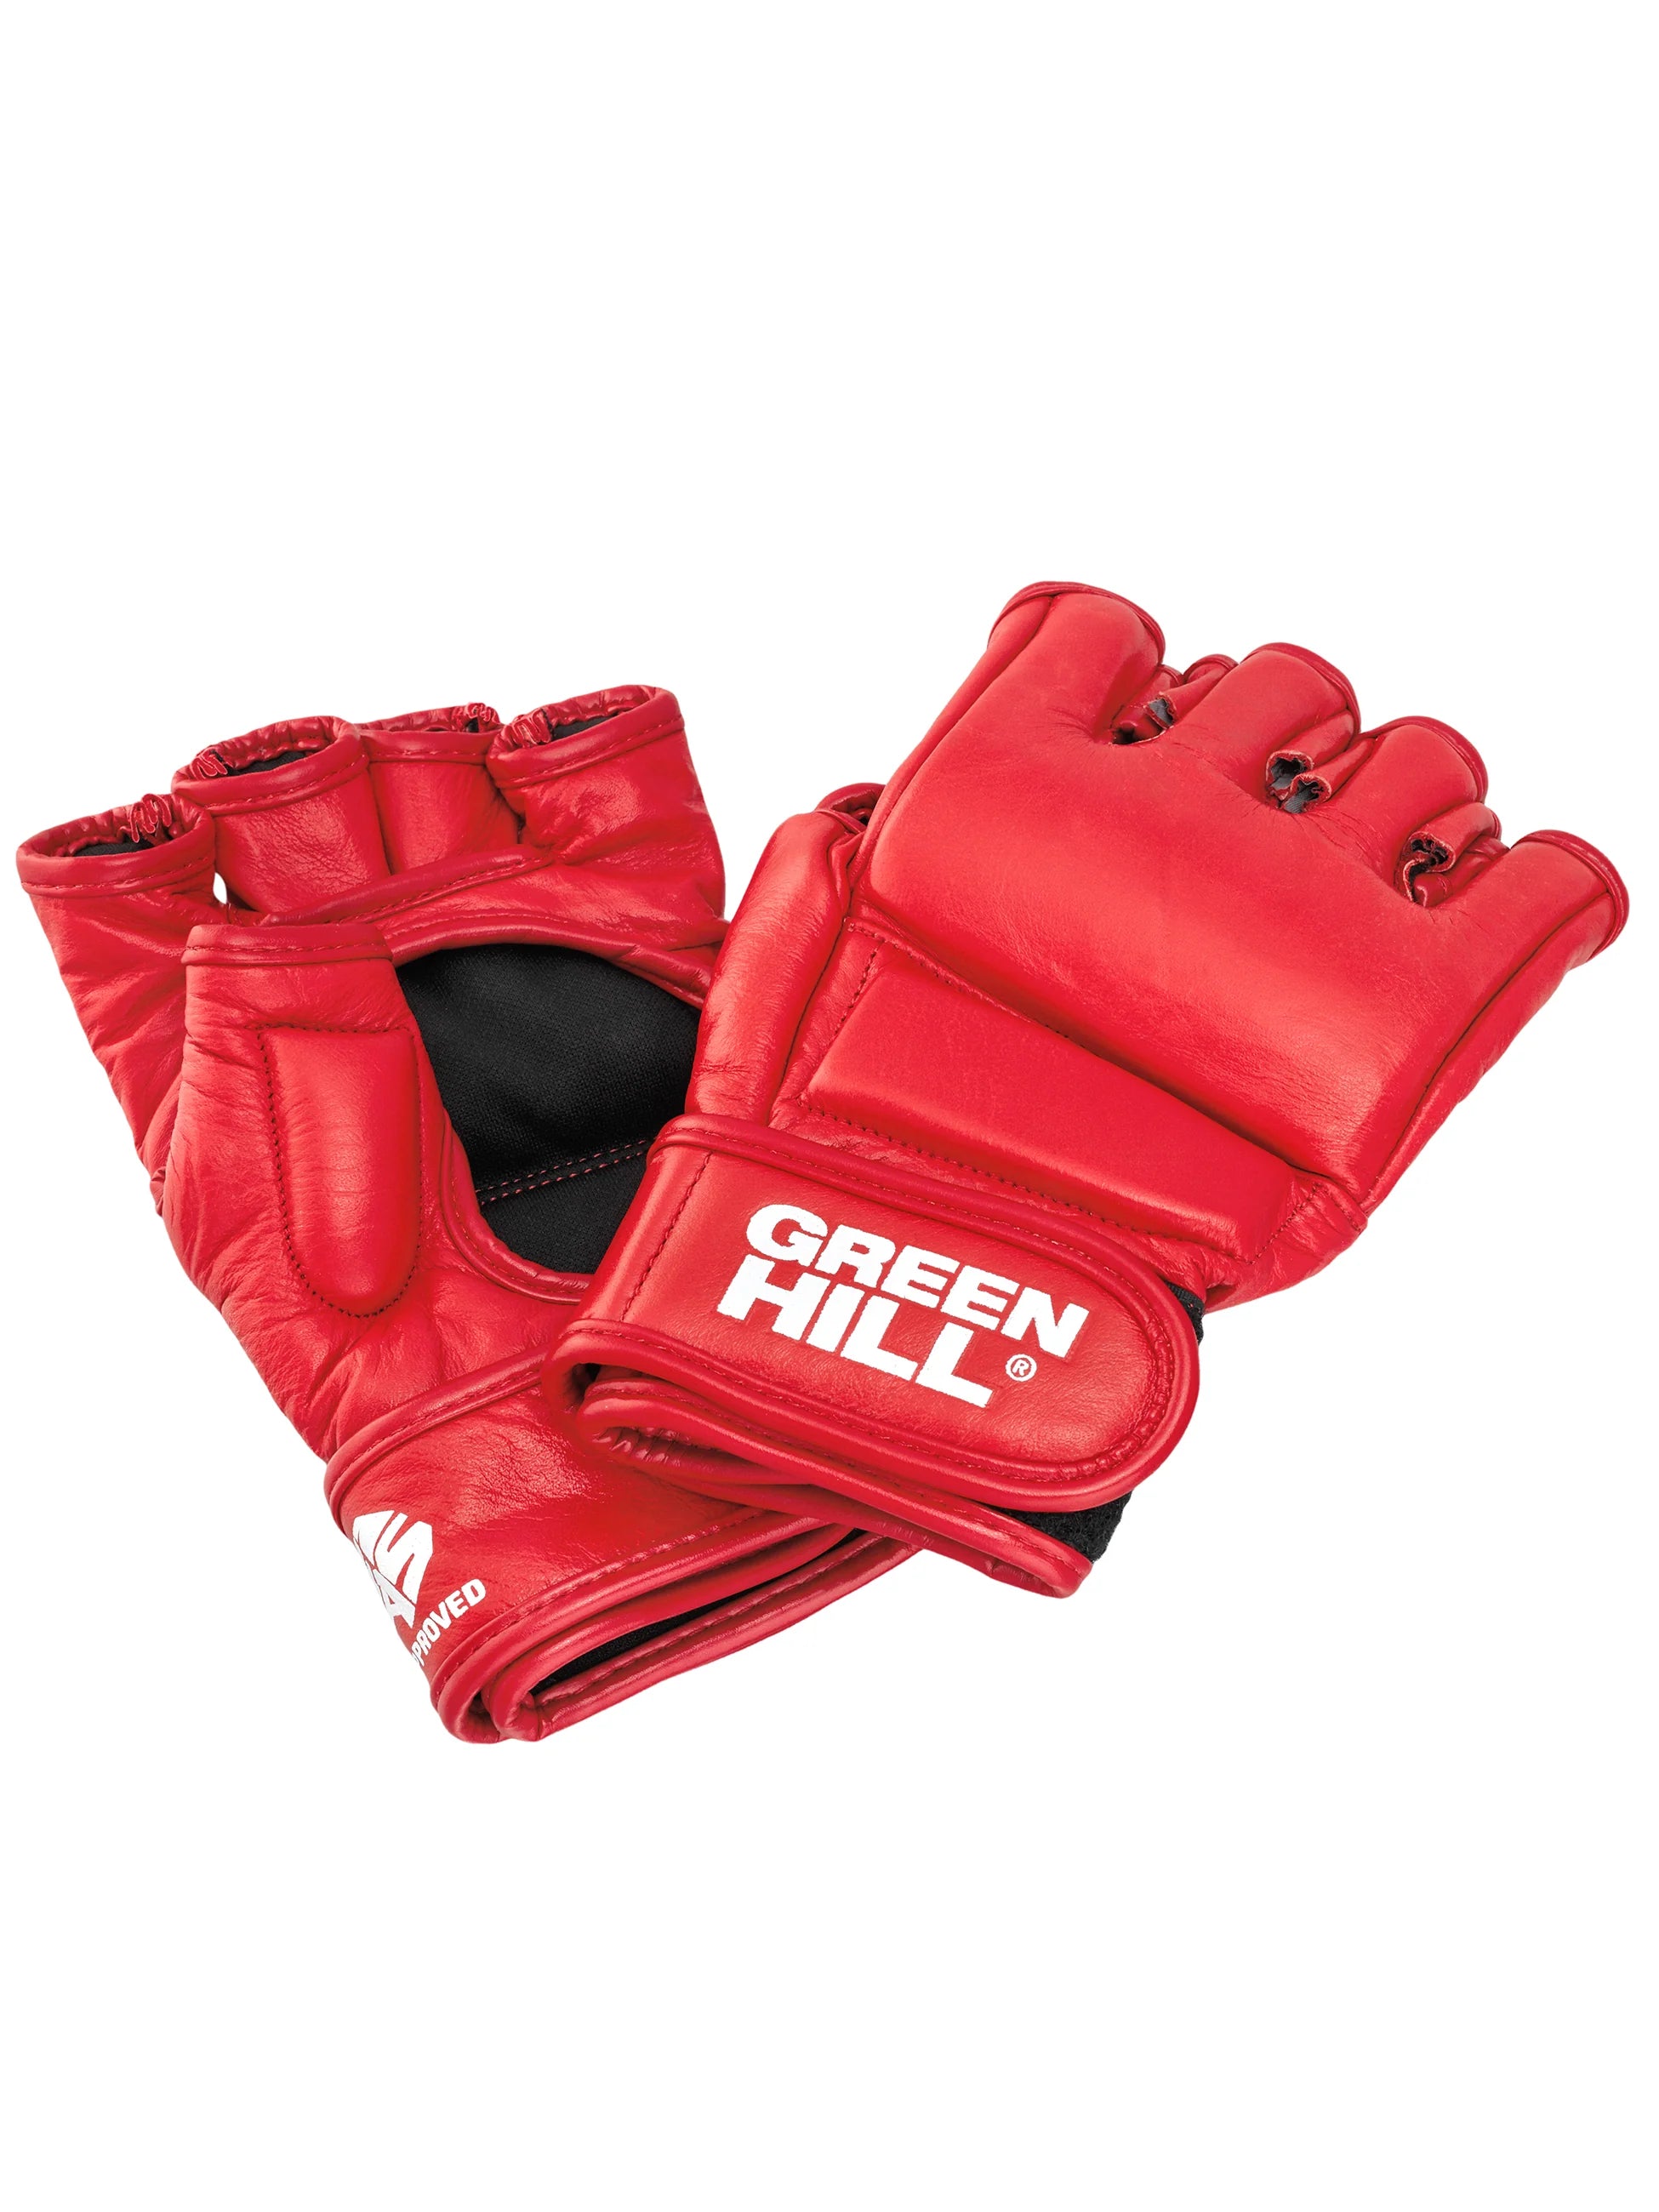 SAMBO GLOVES FIAS APPROVED